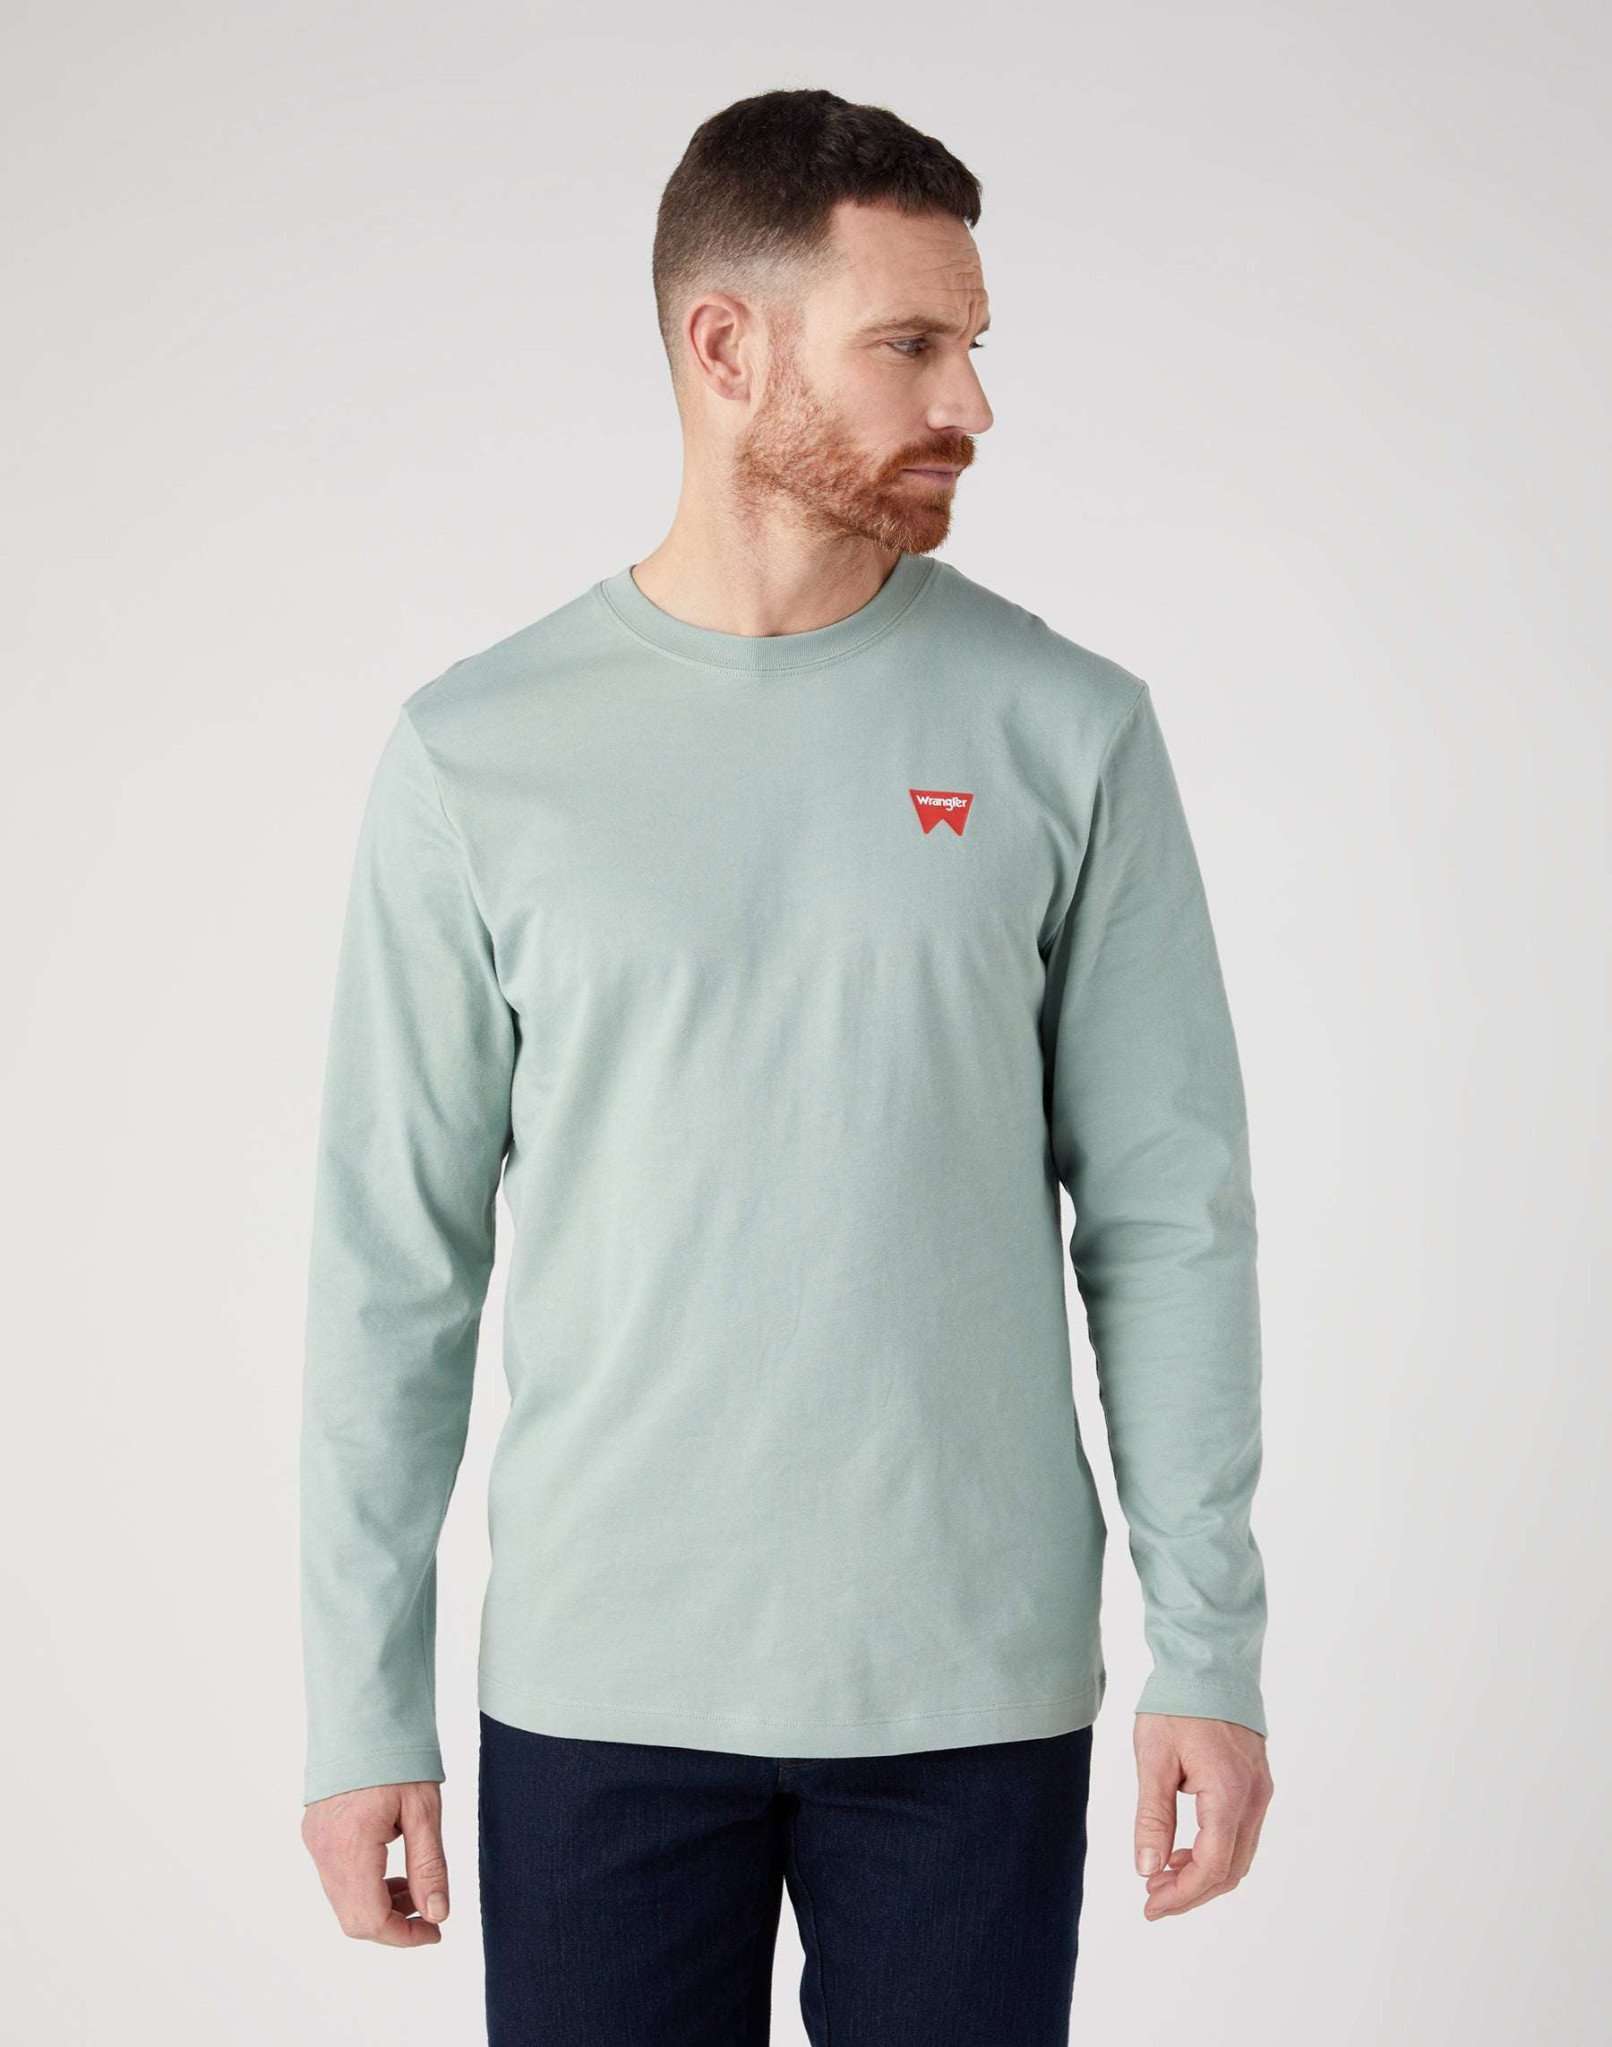 LS Sign Off Tee in Green Milieu Pullover Wrangler   